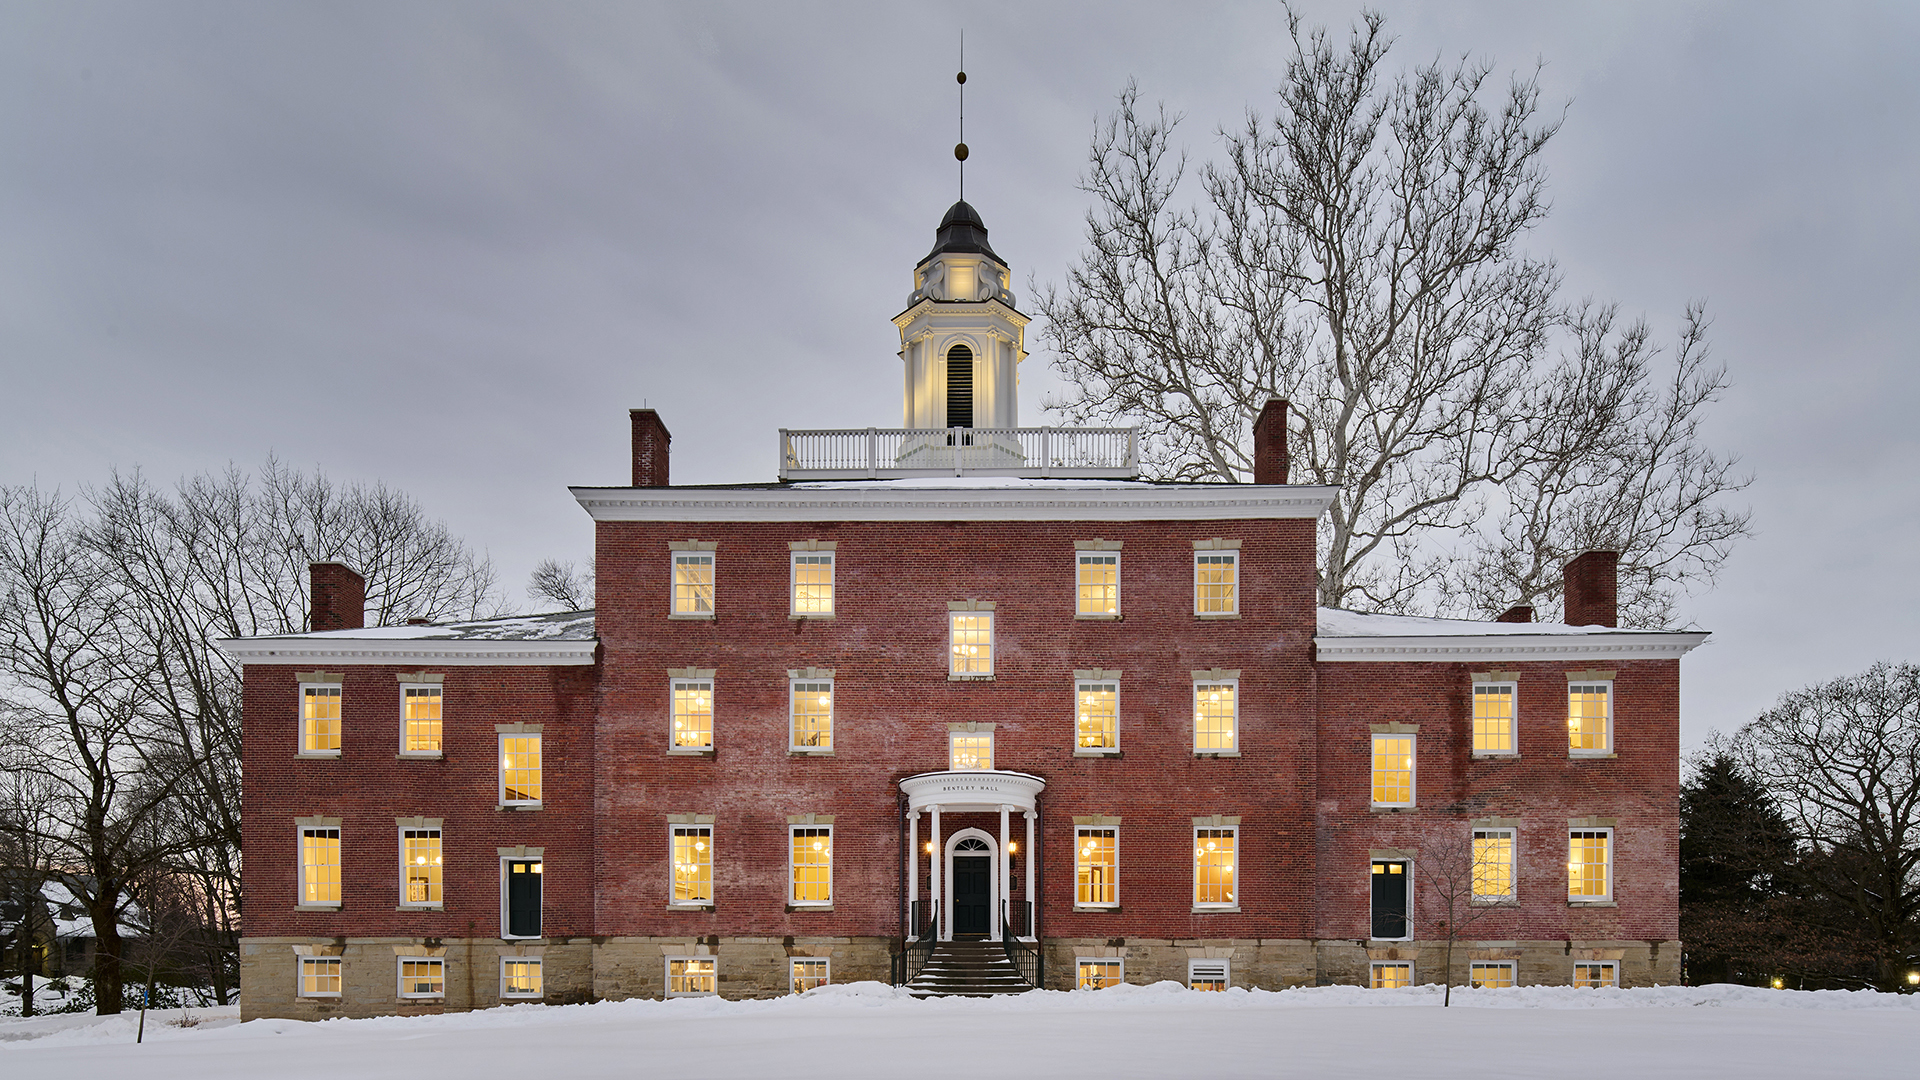 Bentley Hall at Allegheny College